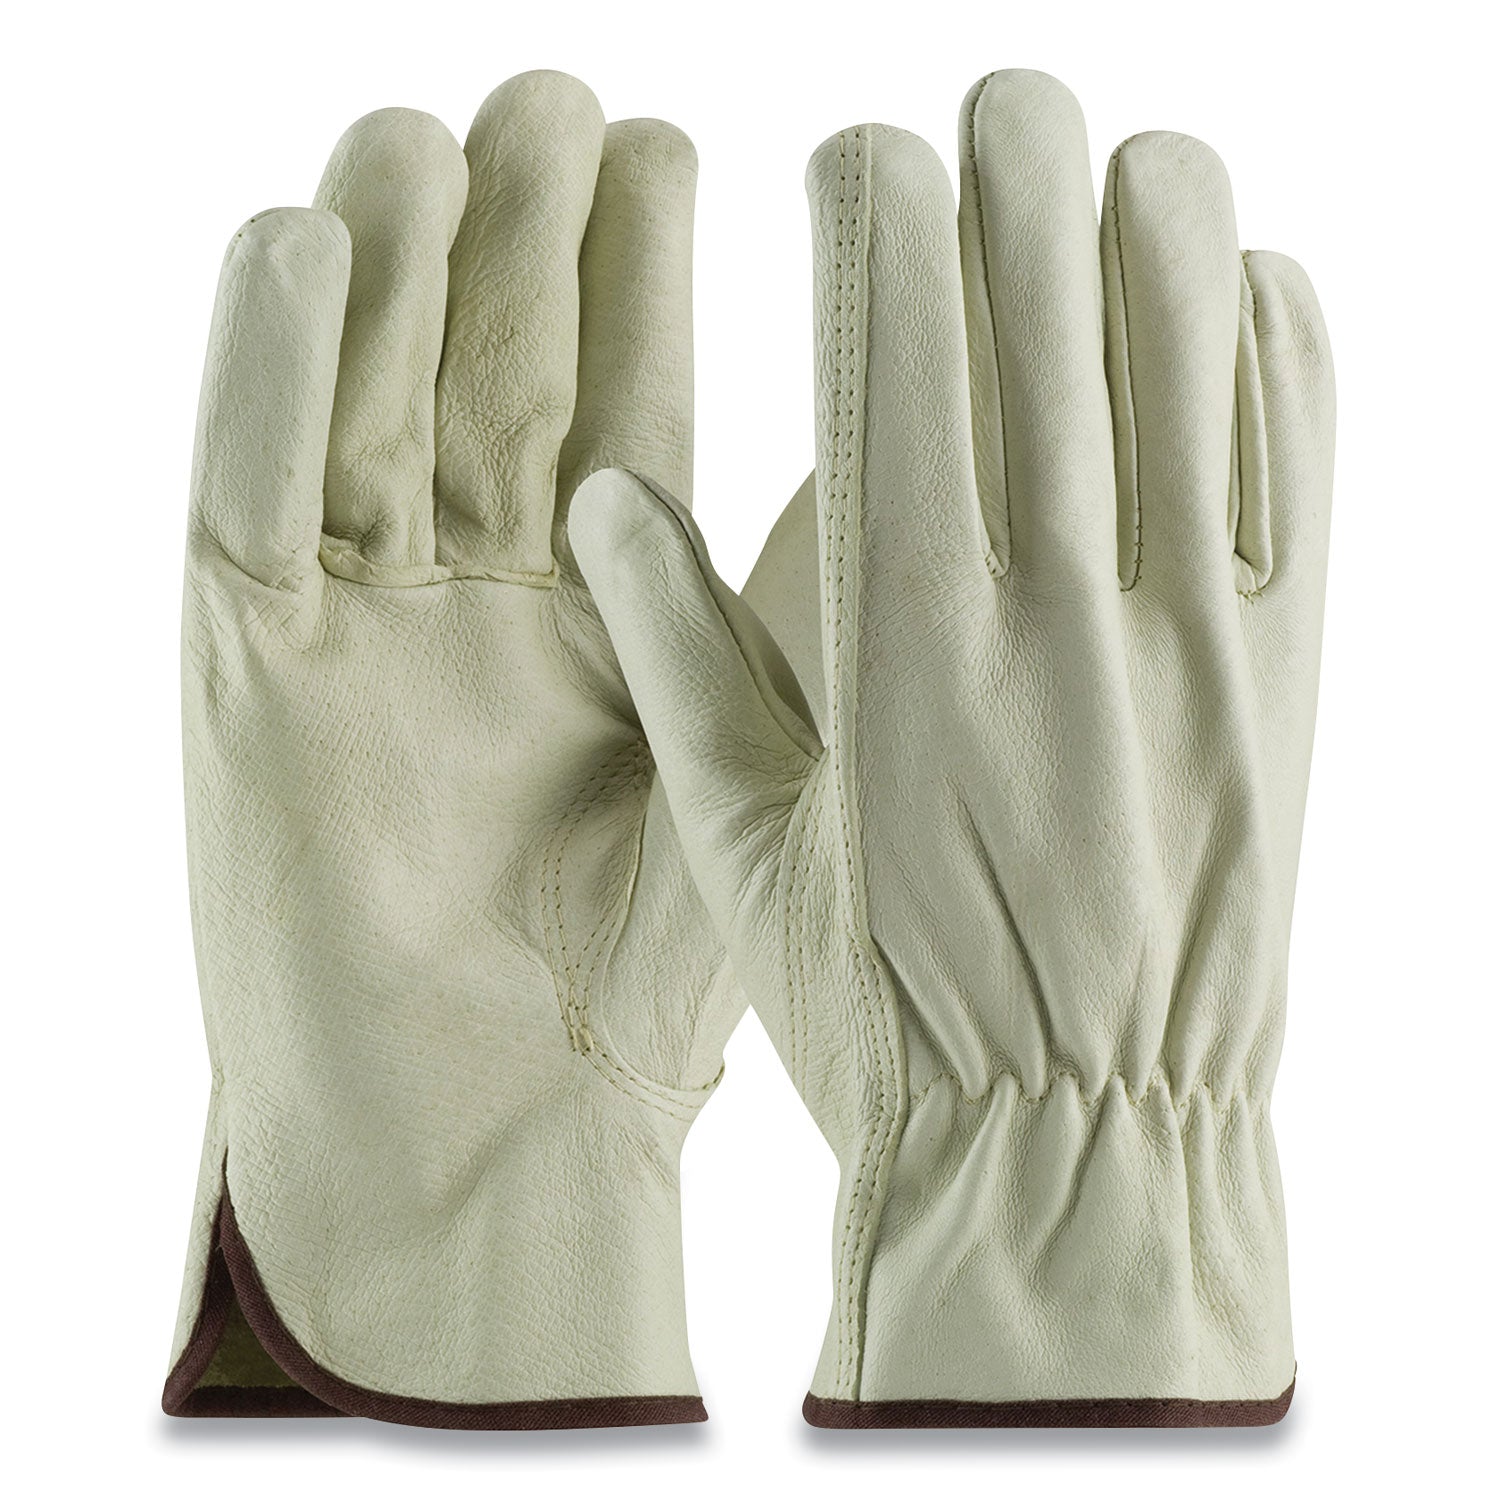 top-grain-pigskin-leather-drivers-gloves-economy-grade-large-gray_pid70361l - 1